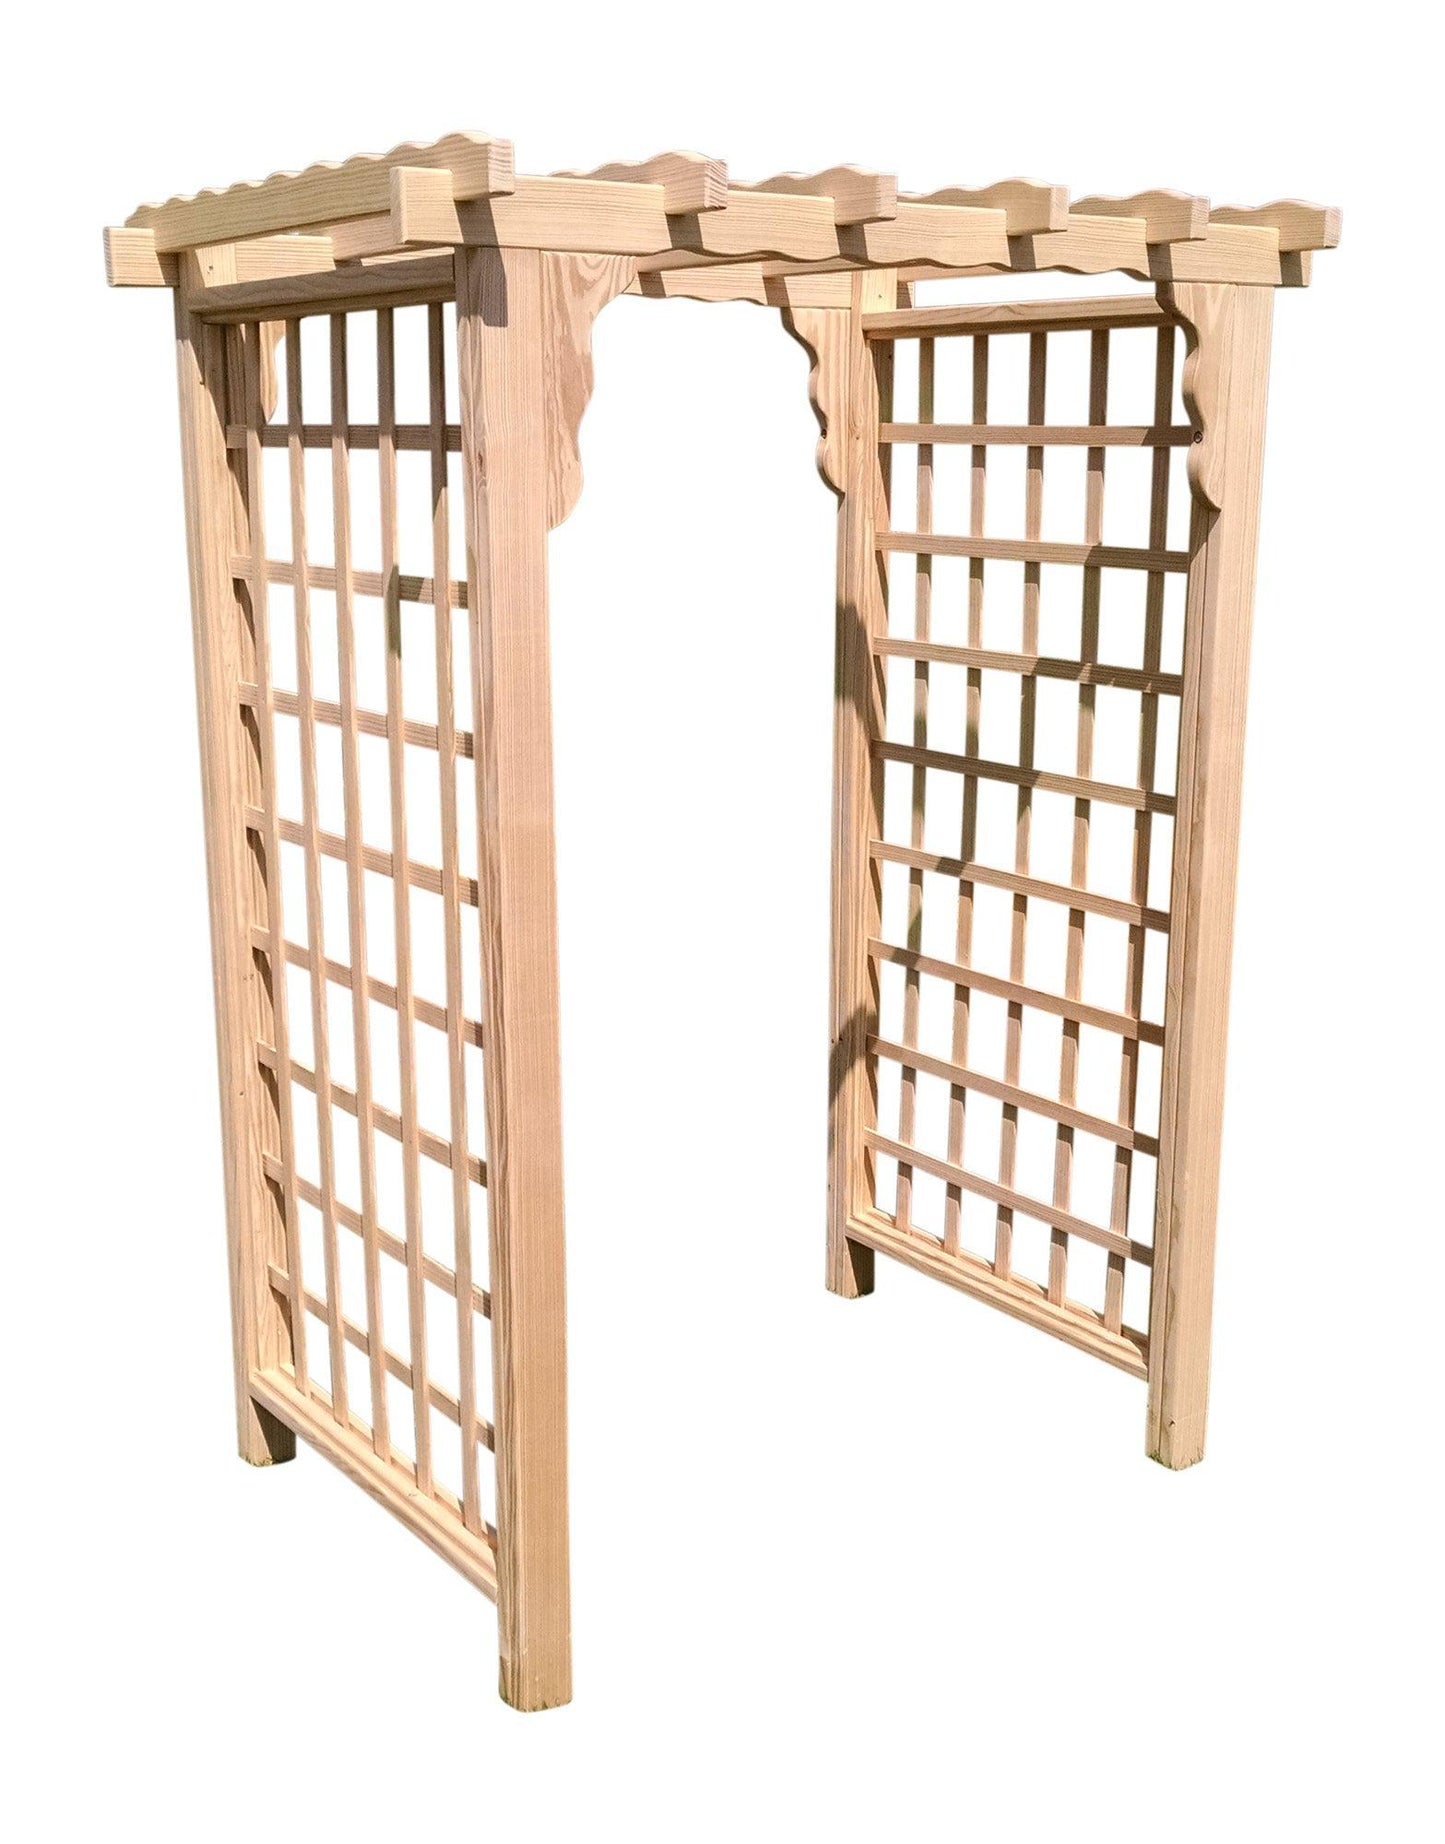 A&L FURNITURE CO. 6' Lexington Pressure Treated Pine Arbor - LEAD TIME TO SHIP 10 BUSINESS DAYS